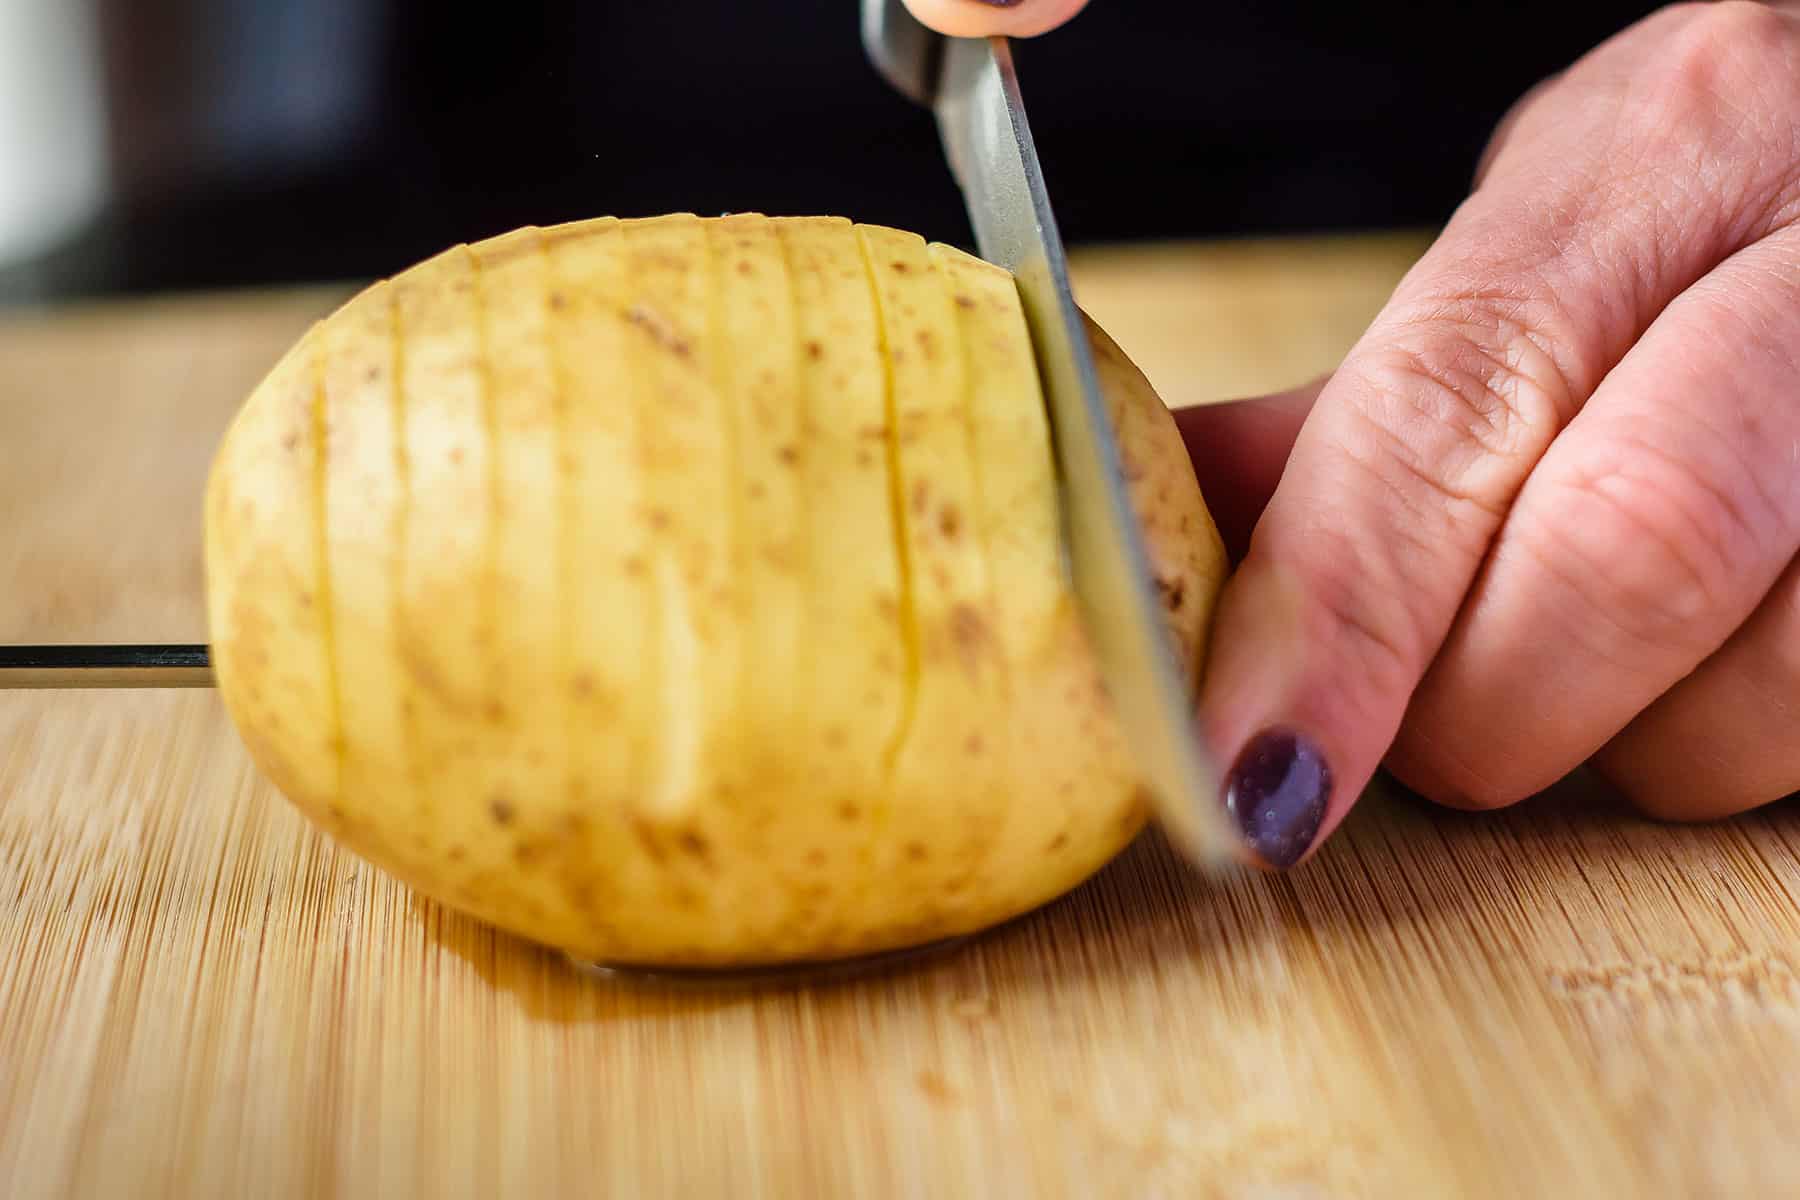 Continue slicing to other end of potato